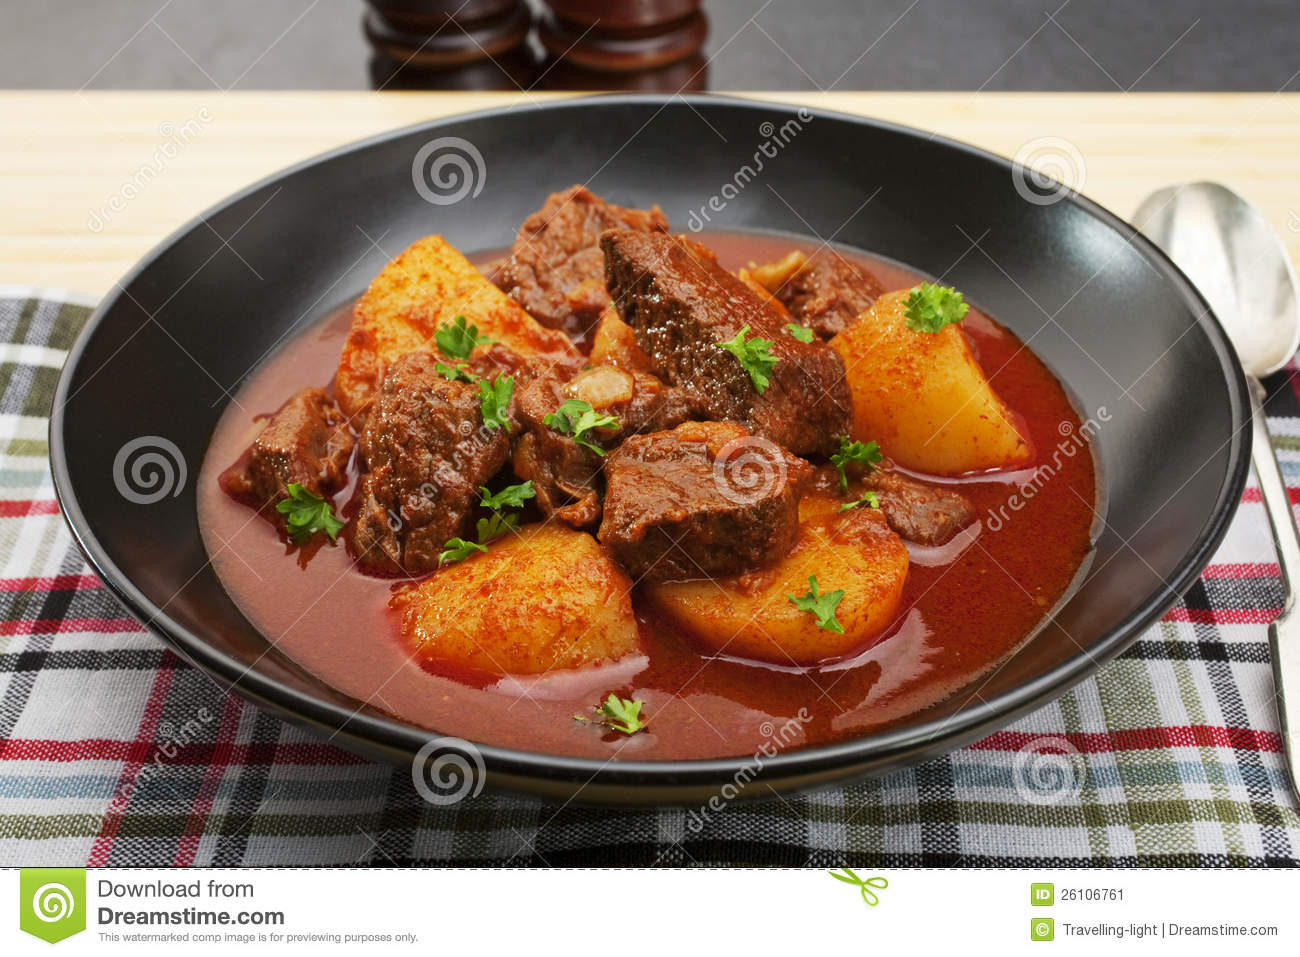 Hungarian Beef Goulash Somewhere Between A Soup And A Stew Made With